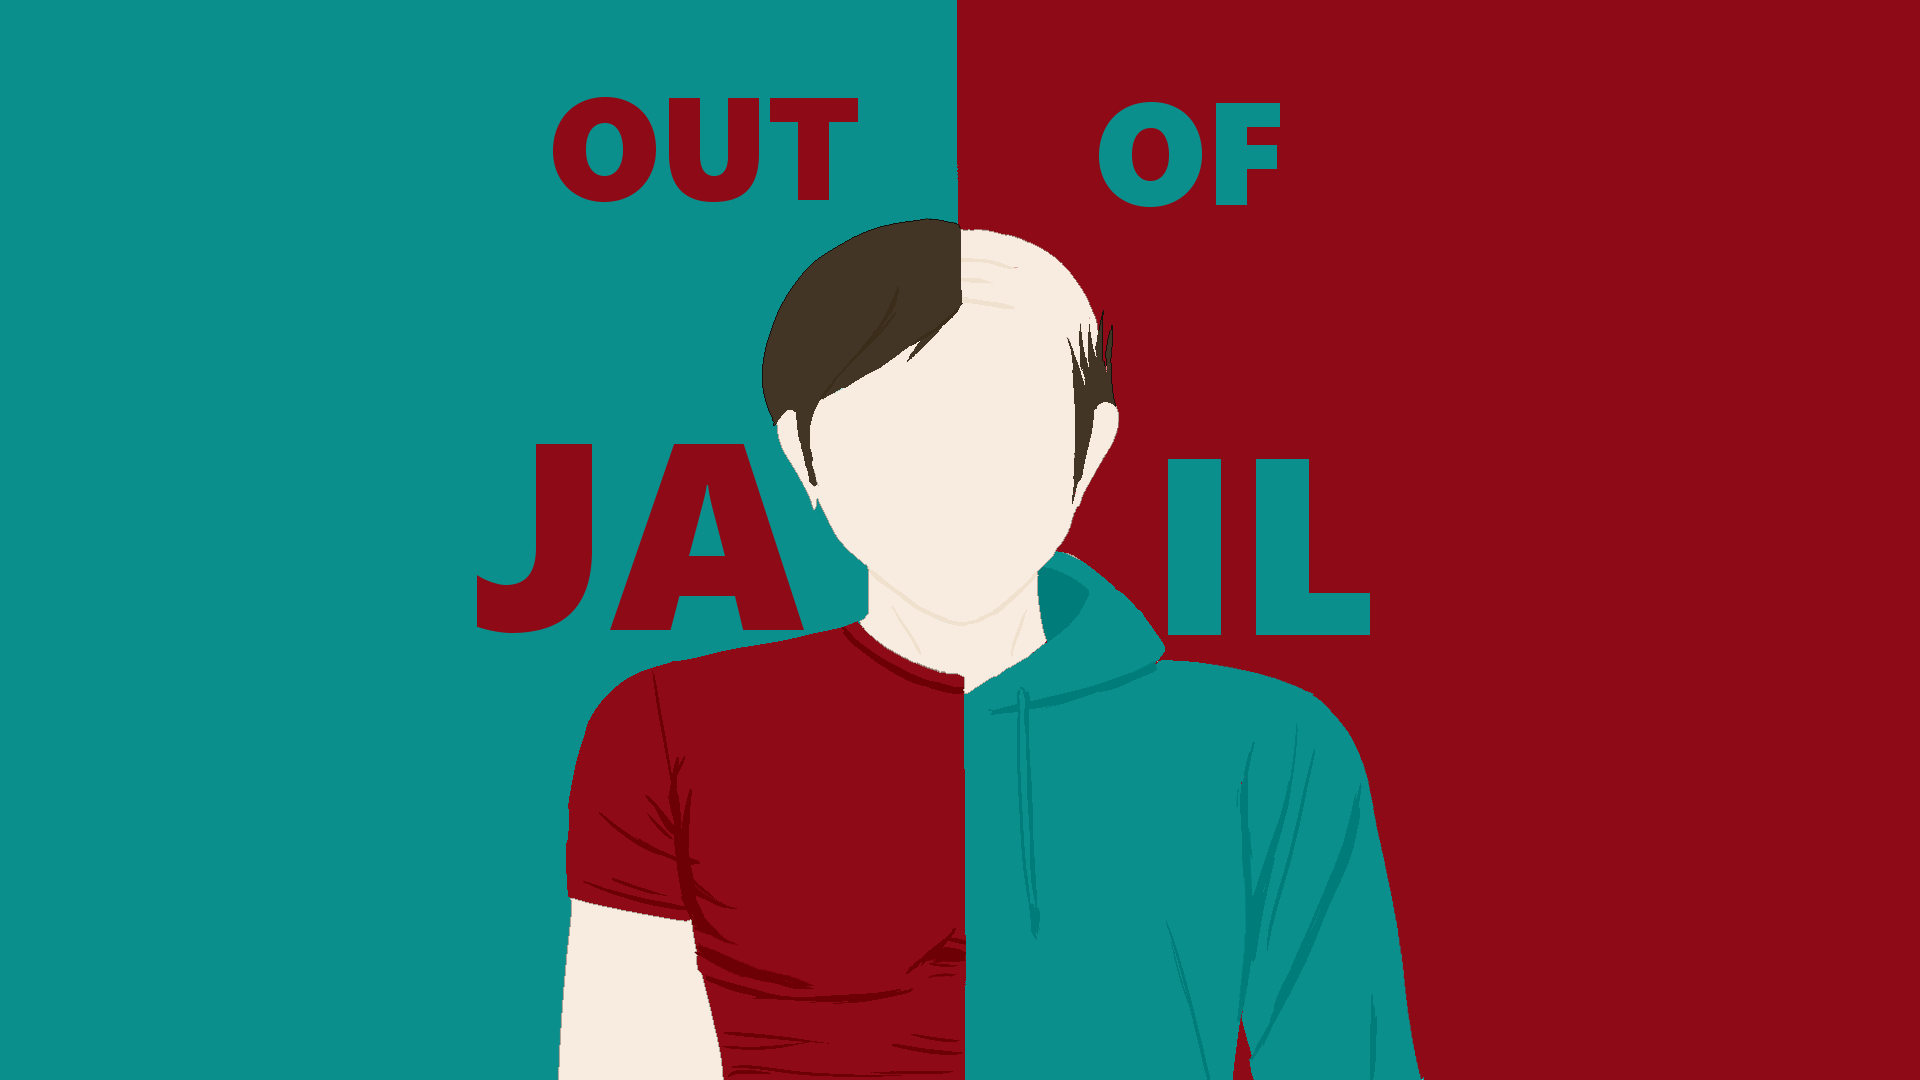 Out of Jail